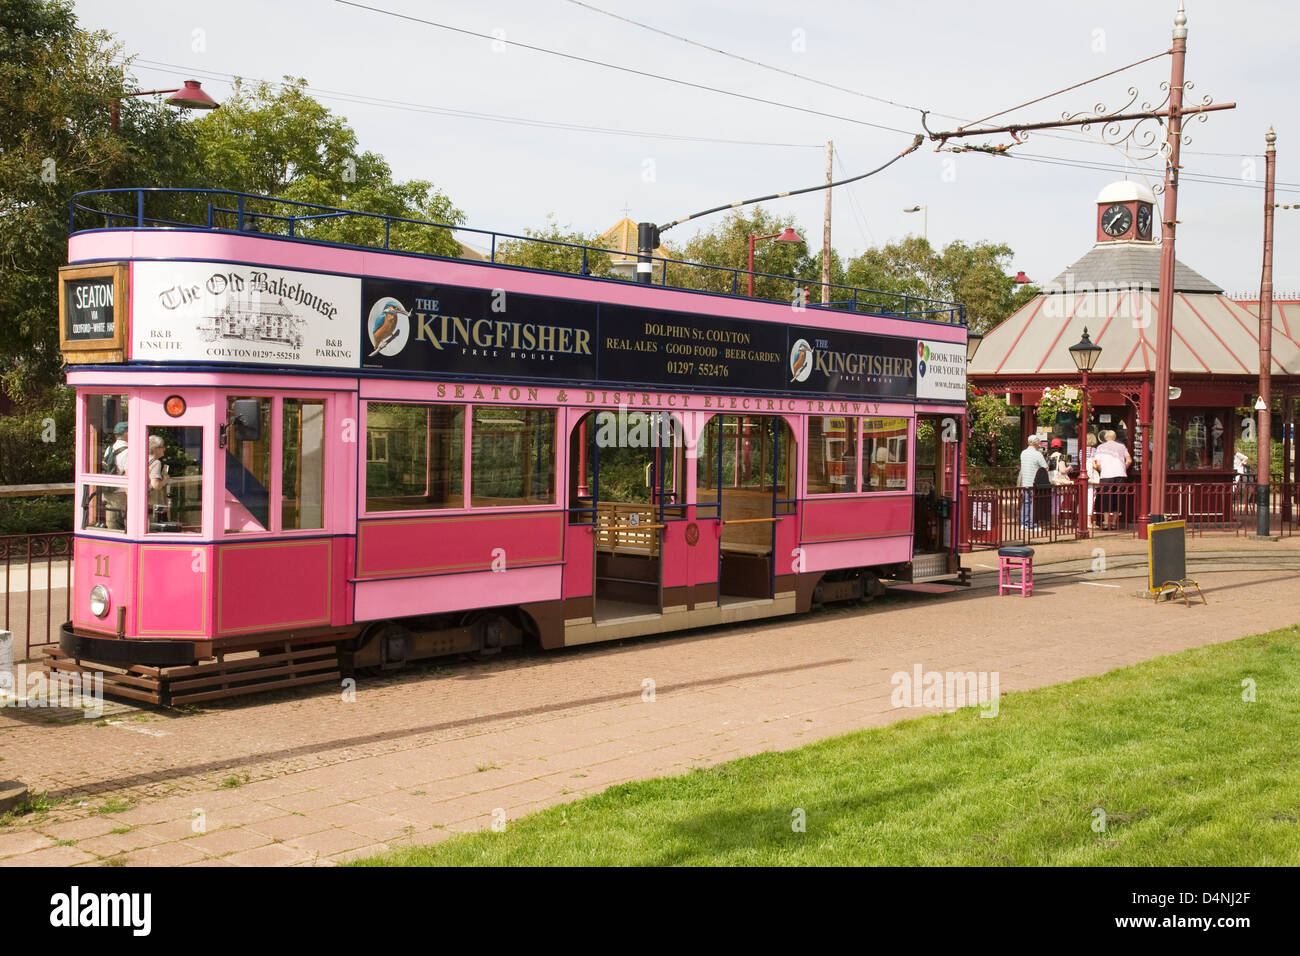 A pink tram at Seaton tram station in Devon, England, UK. Stock Photo